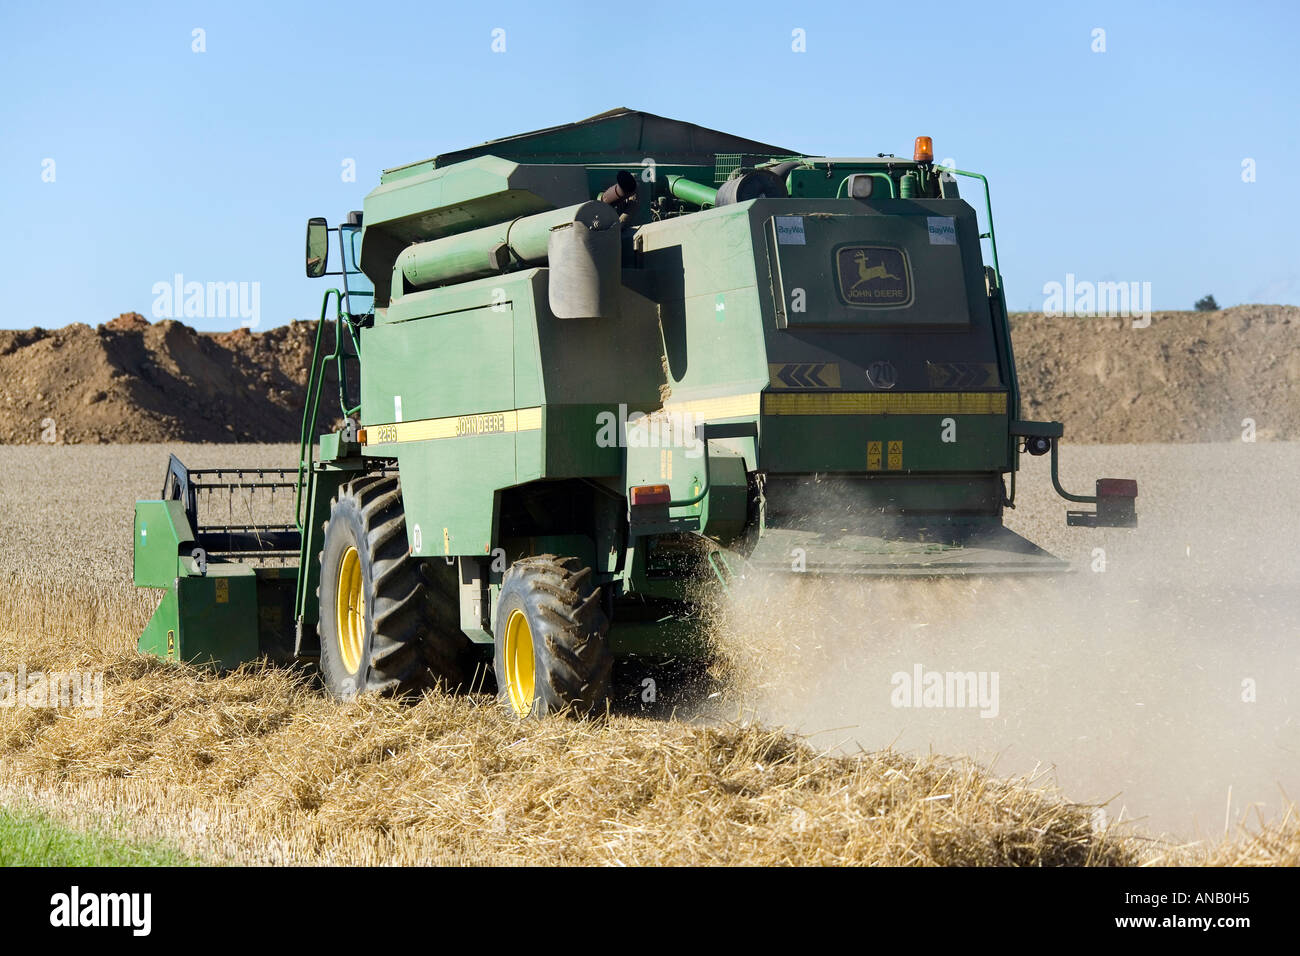 A combine harvester is harvesting wheat Stock Photo